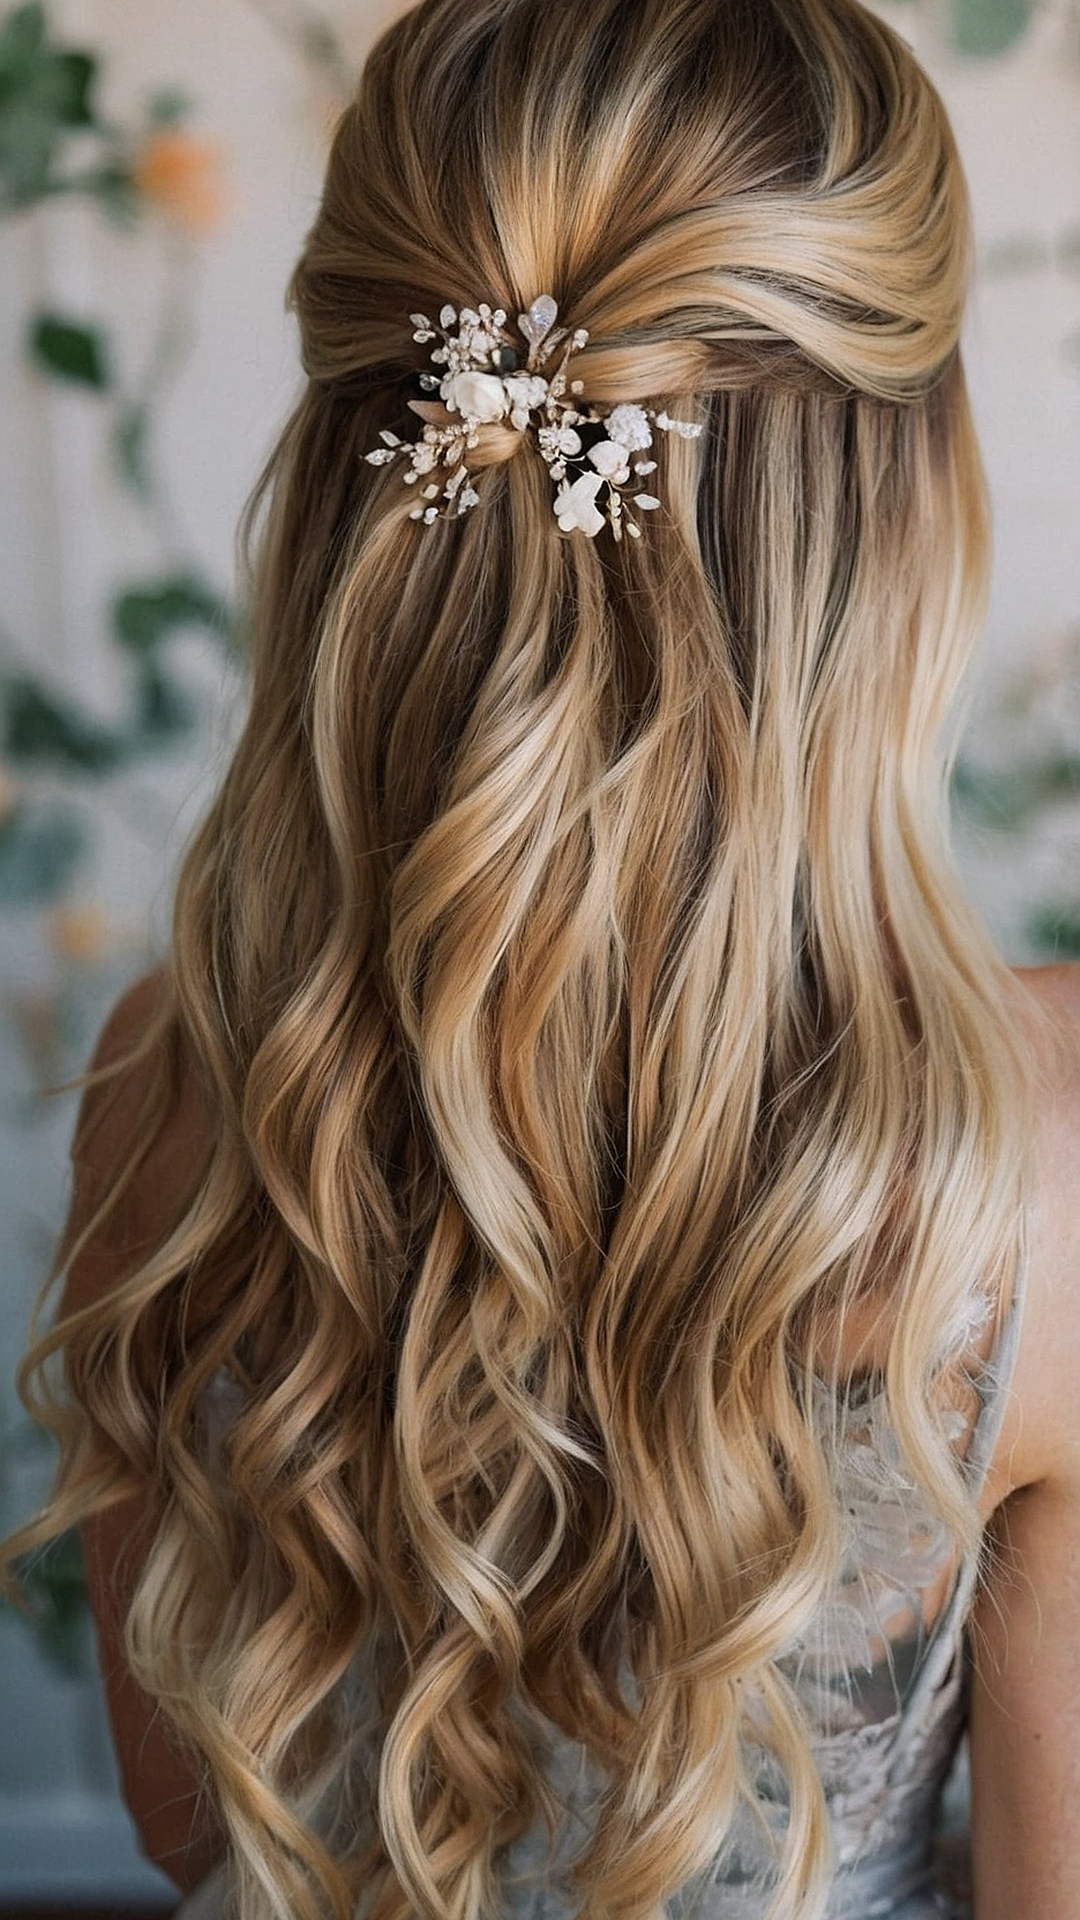 Chic Half Up Half Down Prom Hair Trends